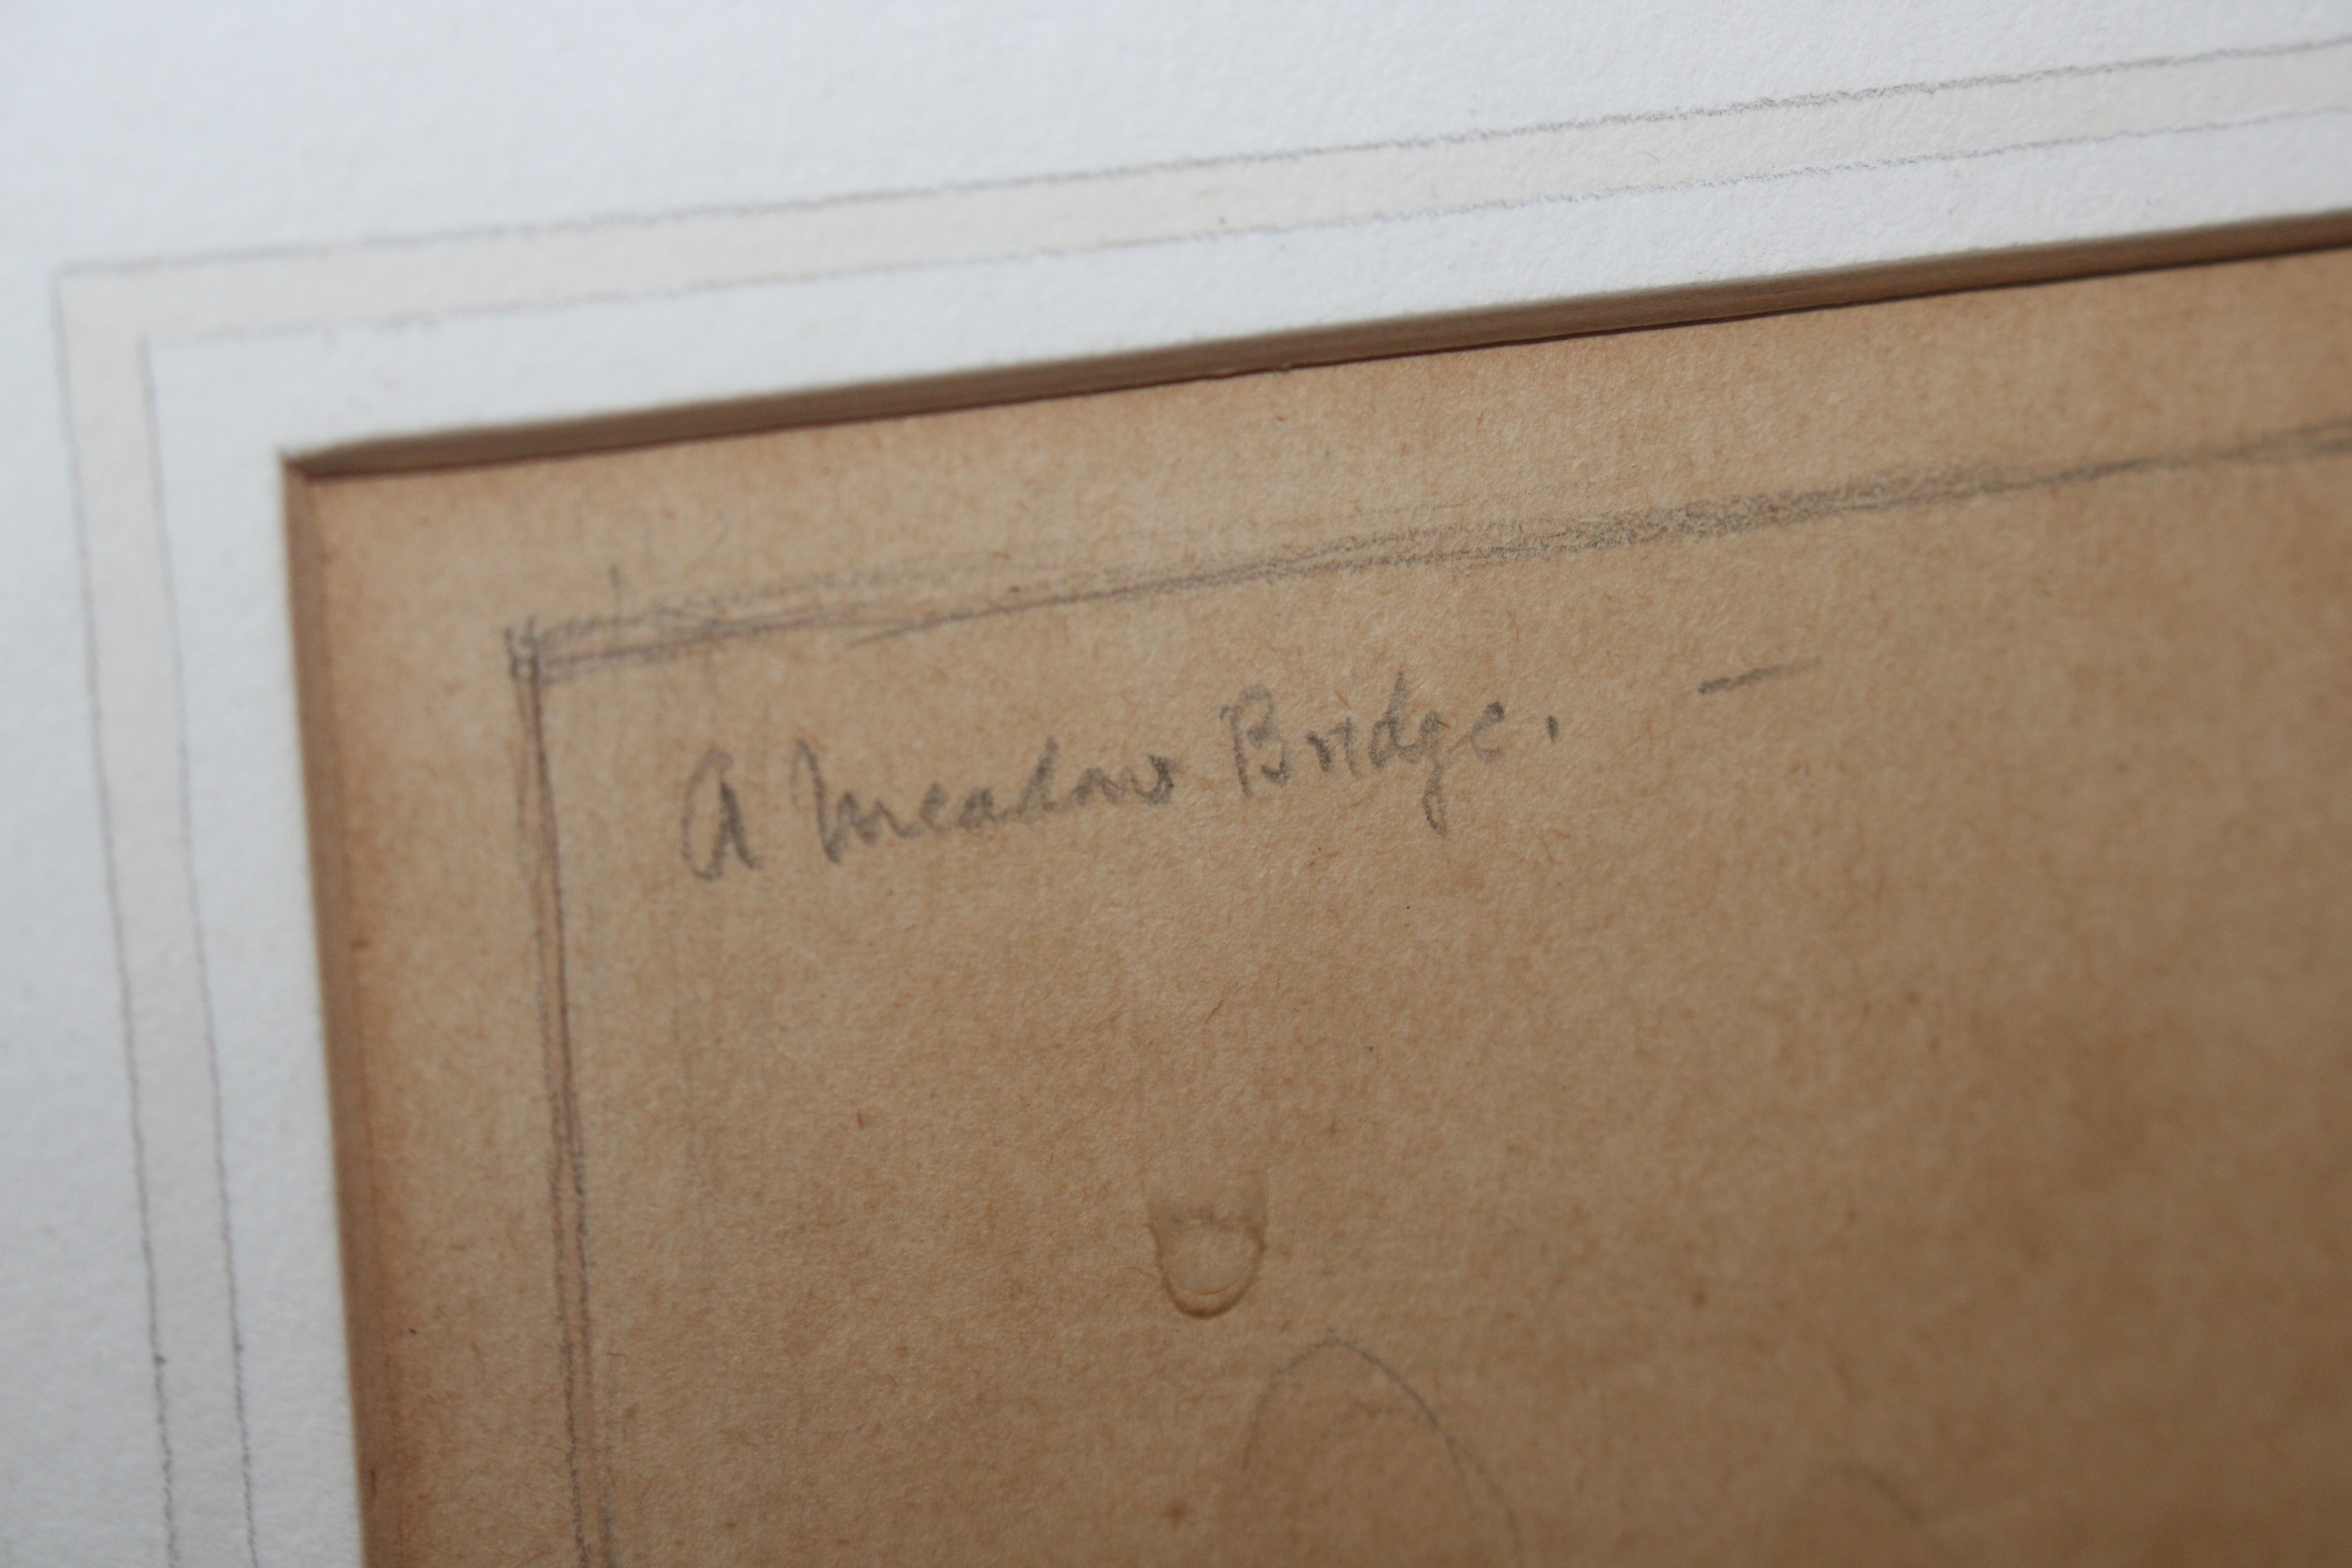 Leonard Russell Squirrell, "A Meadow Bridge" signe - Image 3 of 6